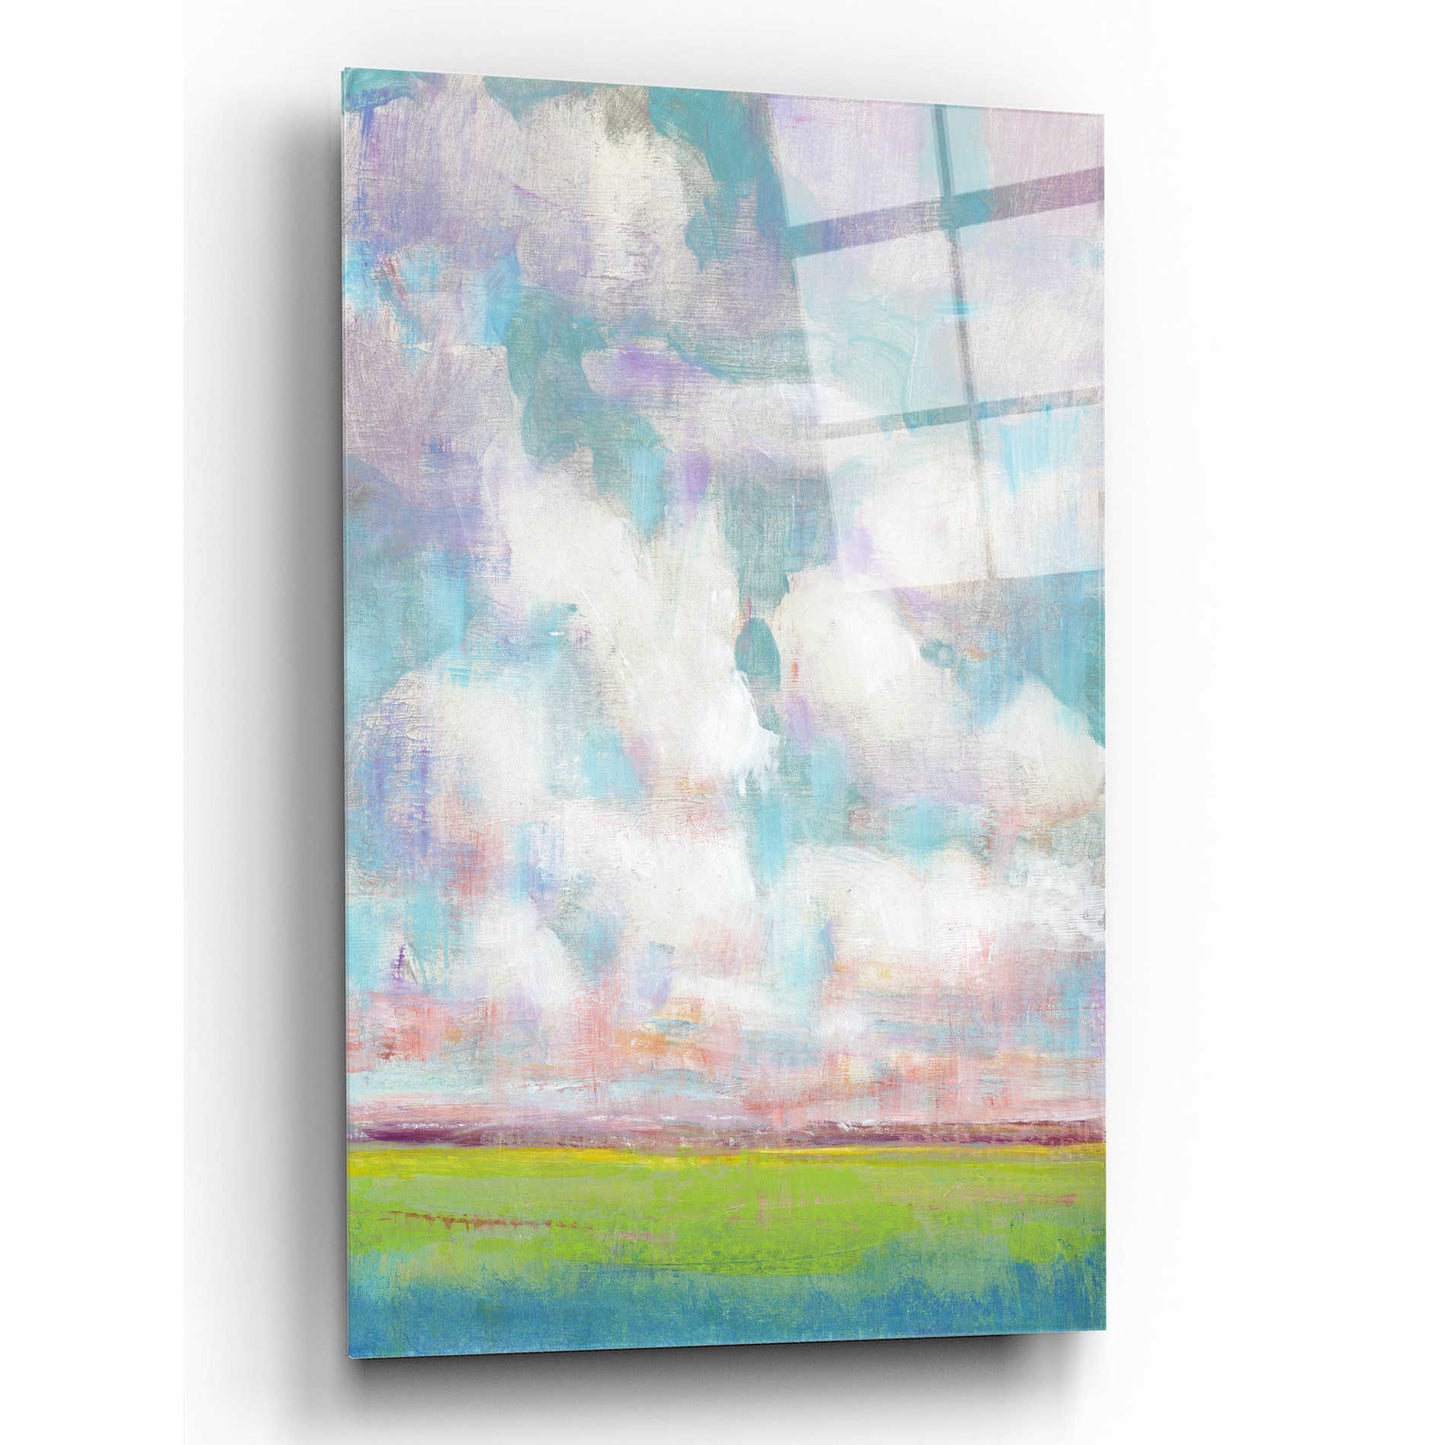 Epic Art 'Clouds in Motion I' by Tim O'Toole, Acrylic Glass Wall Art,12x16